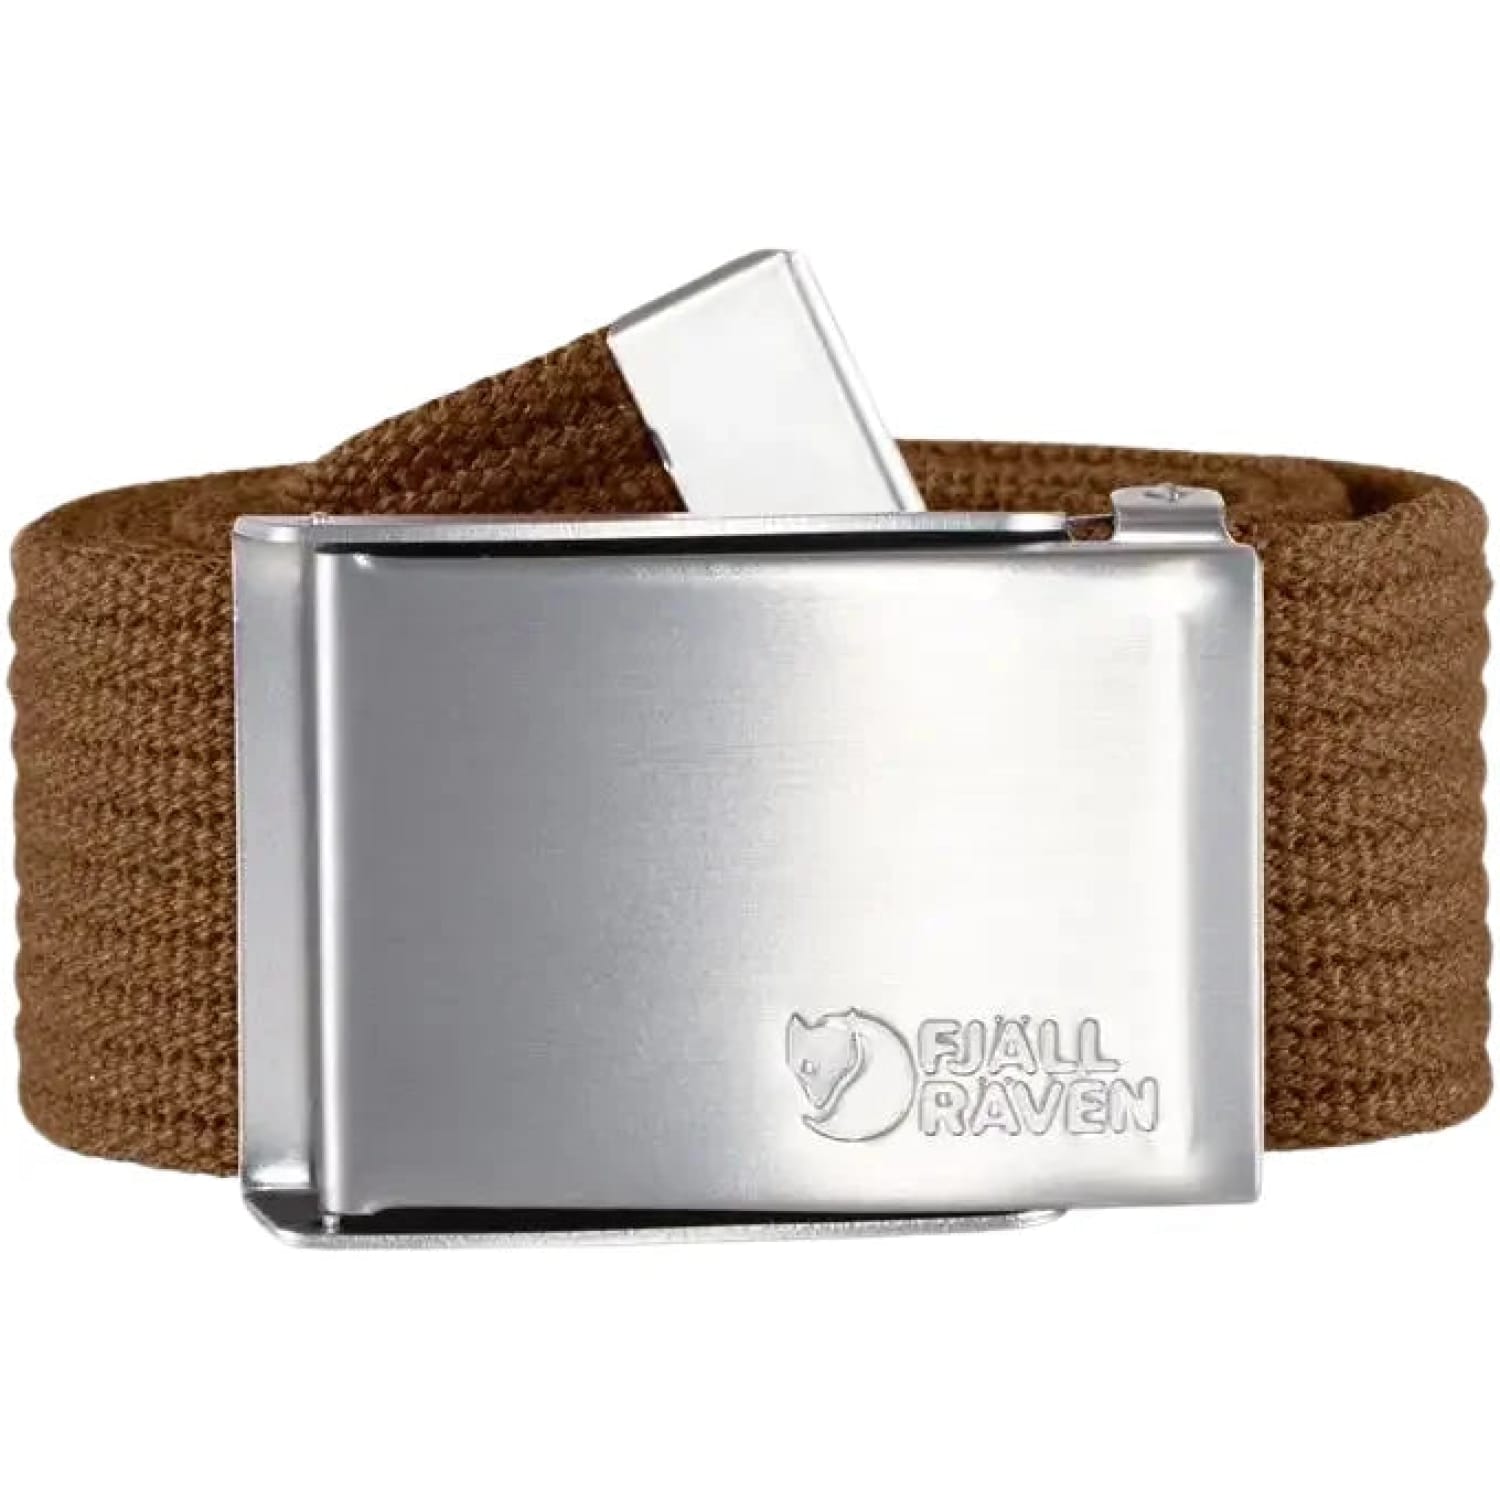 Fjallraven Canvas Belt, Timber Brown, front view 